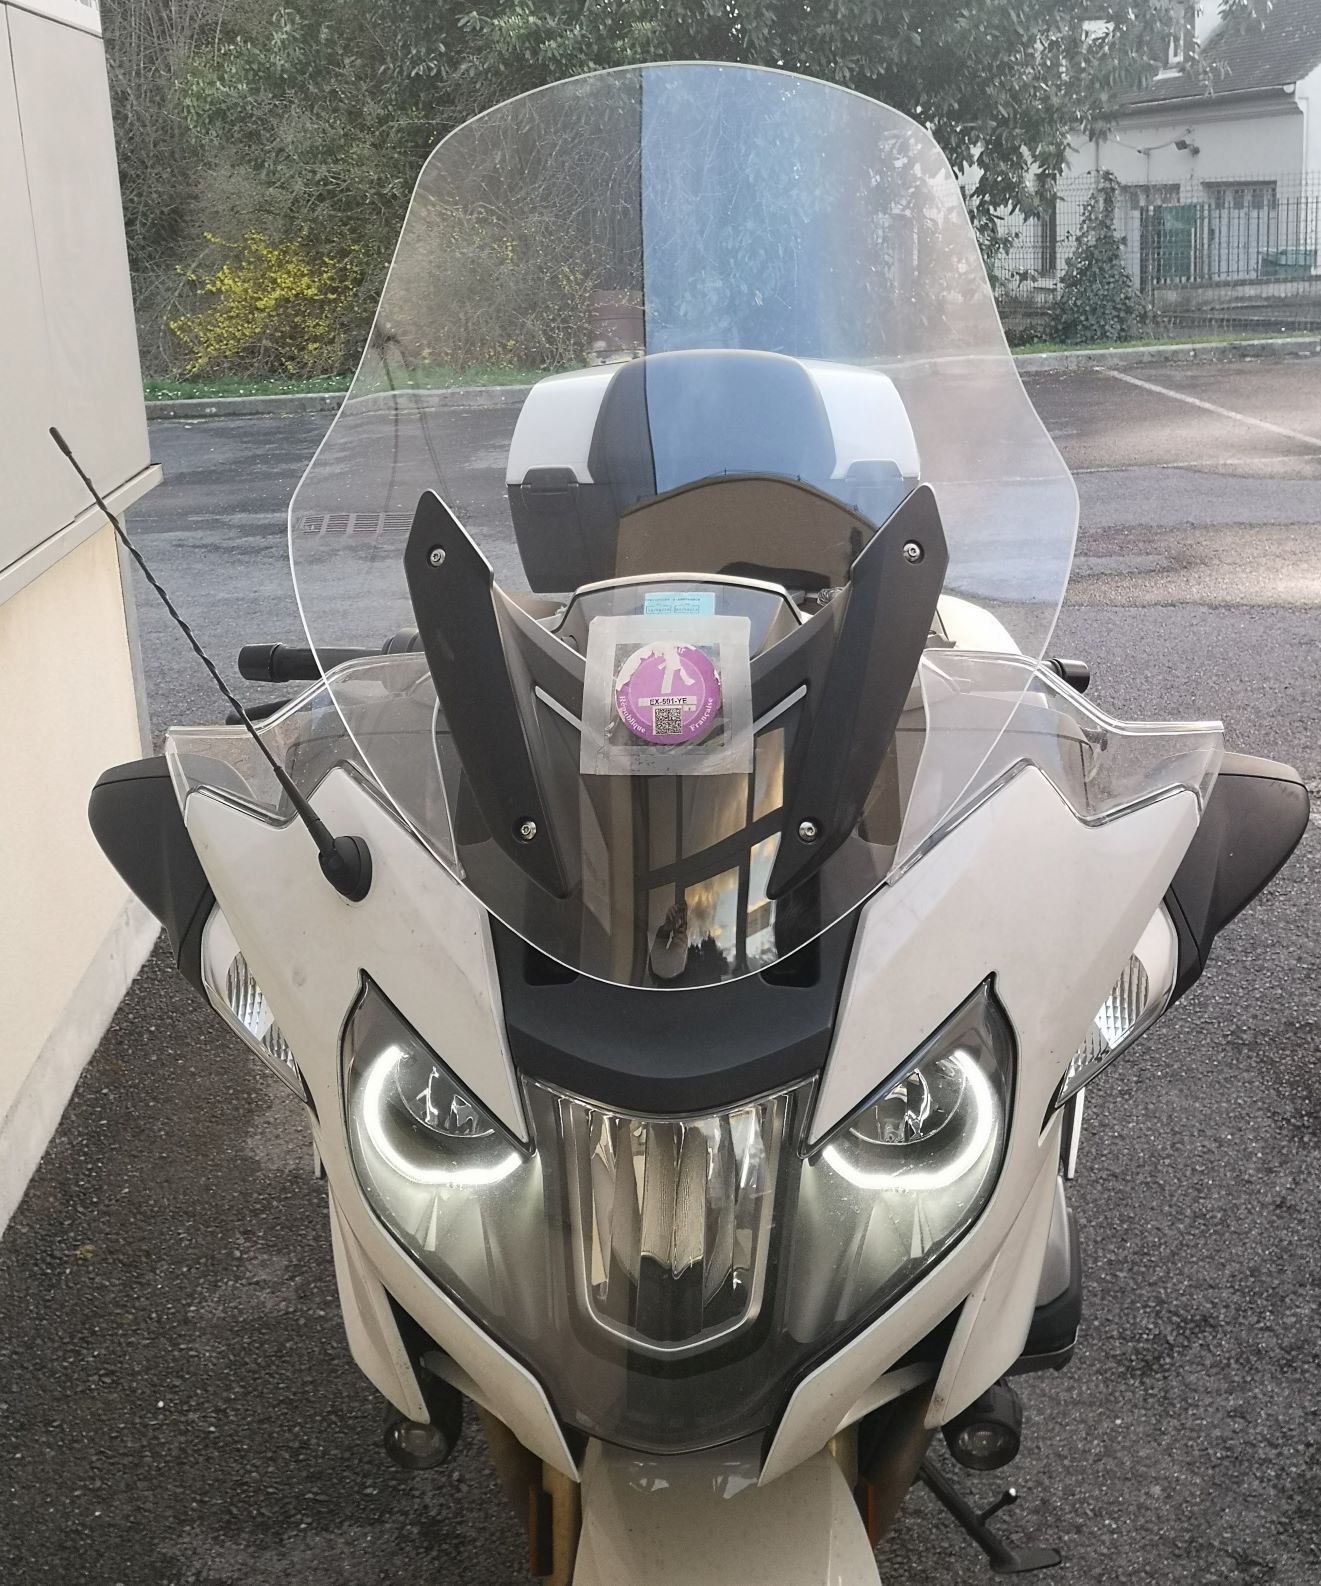 Secdem / セクデムウィン High Protection Screen BMW R 1200 RT, Thickness 5 mm, Height 70 cm | BB100HPFC